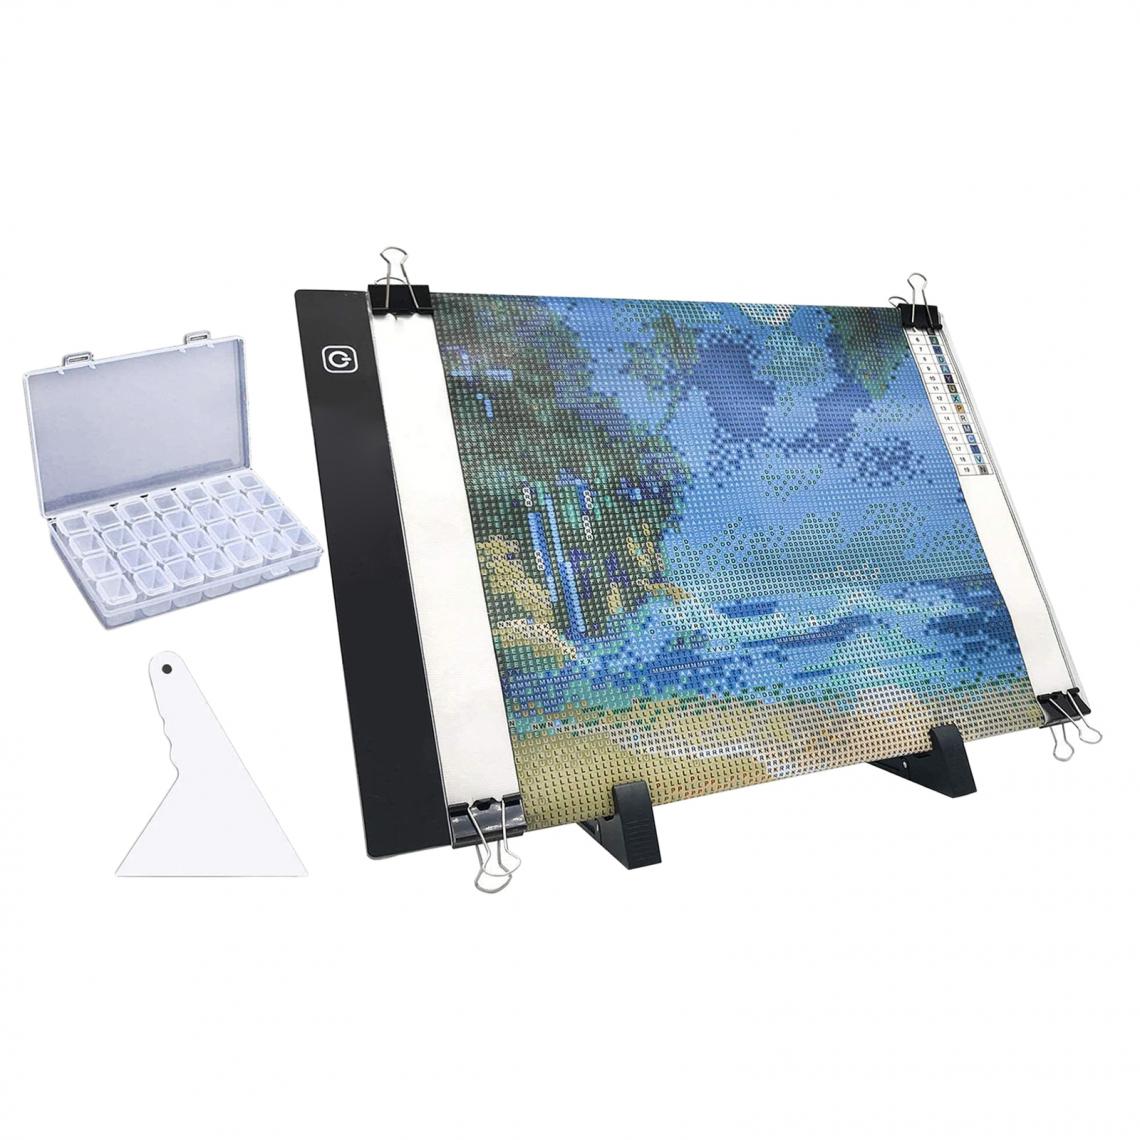 marque generique - Portable A4 Tracing LED Copy Board Light Box, Ultra-Thin Adjustable USB Power Artcraft LED Trace Light Pad for Tattoo Drawing, Streaming, Sketching, - Tablette Graphique